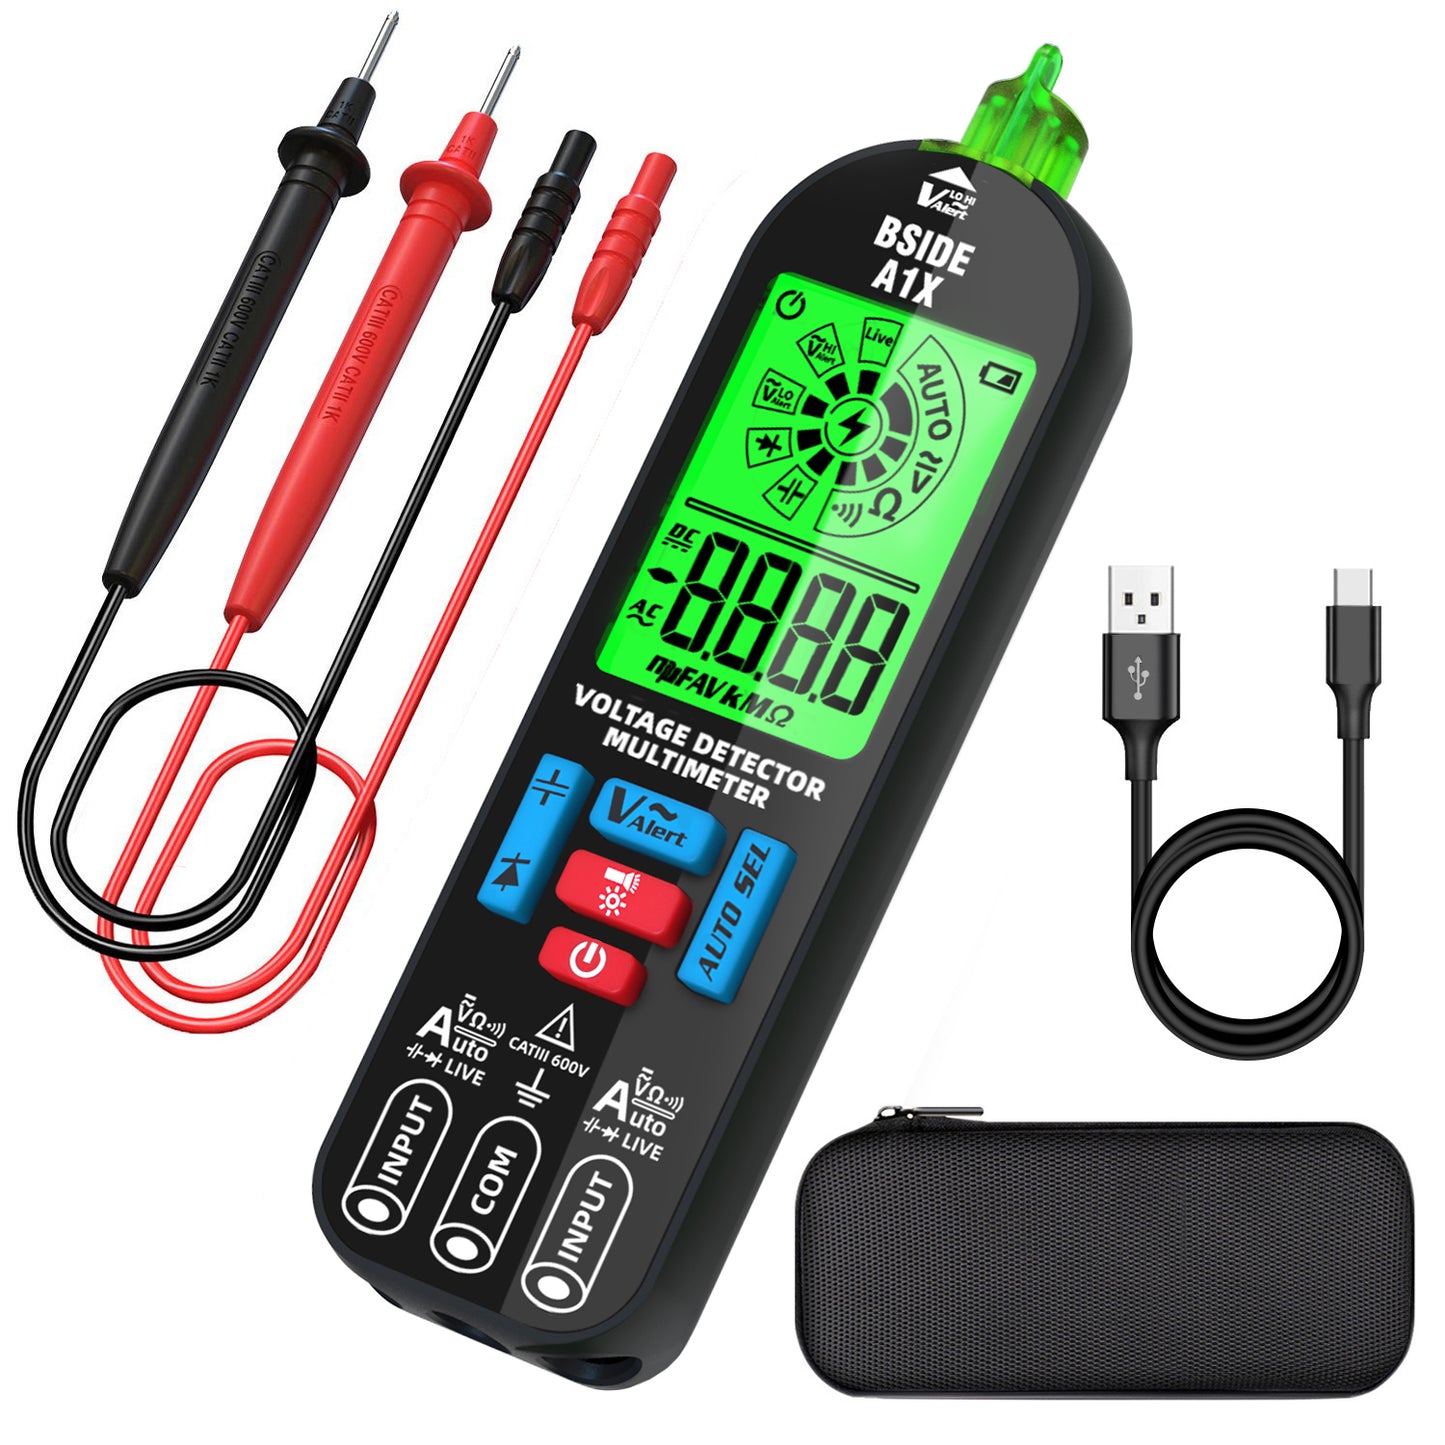 BSIDE Digital Multimeter Tester Rechargeable Electrical Voltmeter, Smart Mode with Red and Green Backlight, Measures Capacitance Diode Ohm Continuity V-Alert DC AC Voltage with Carrying Case